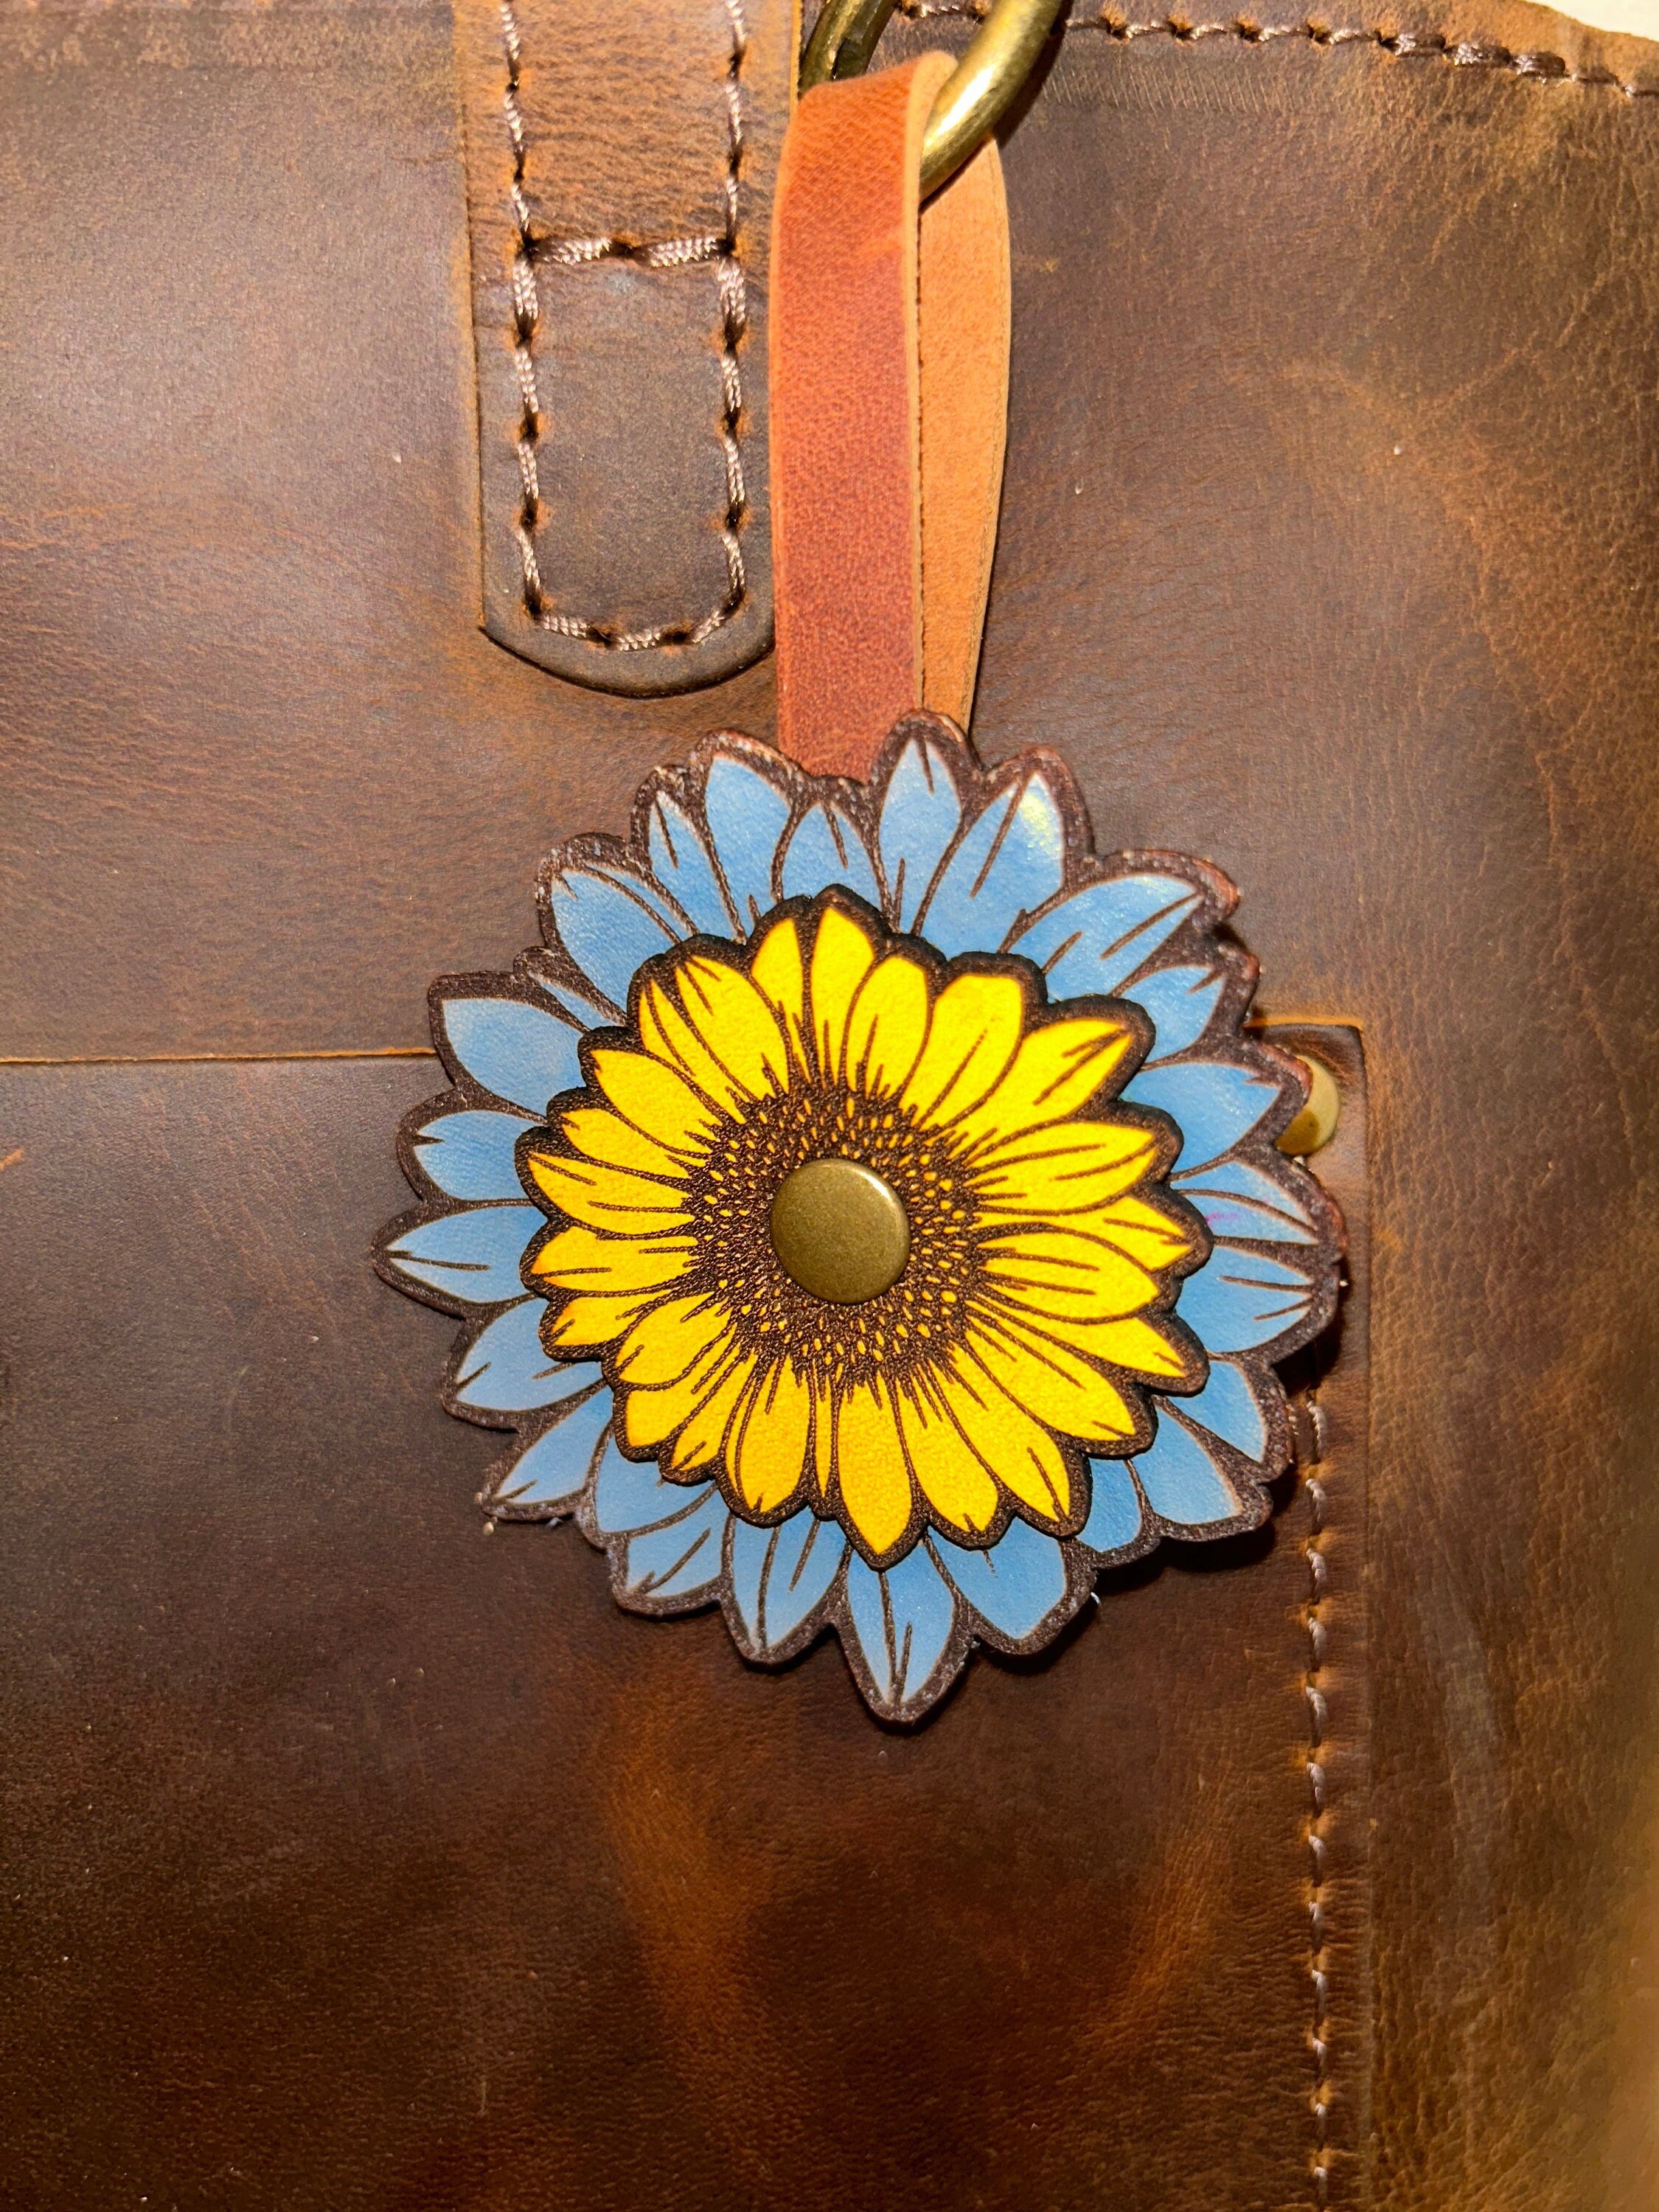 Leather Flower Purse Charms - Deluxe Flower in Fall Orange and Brown